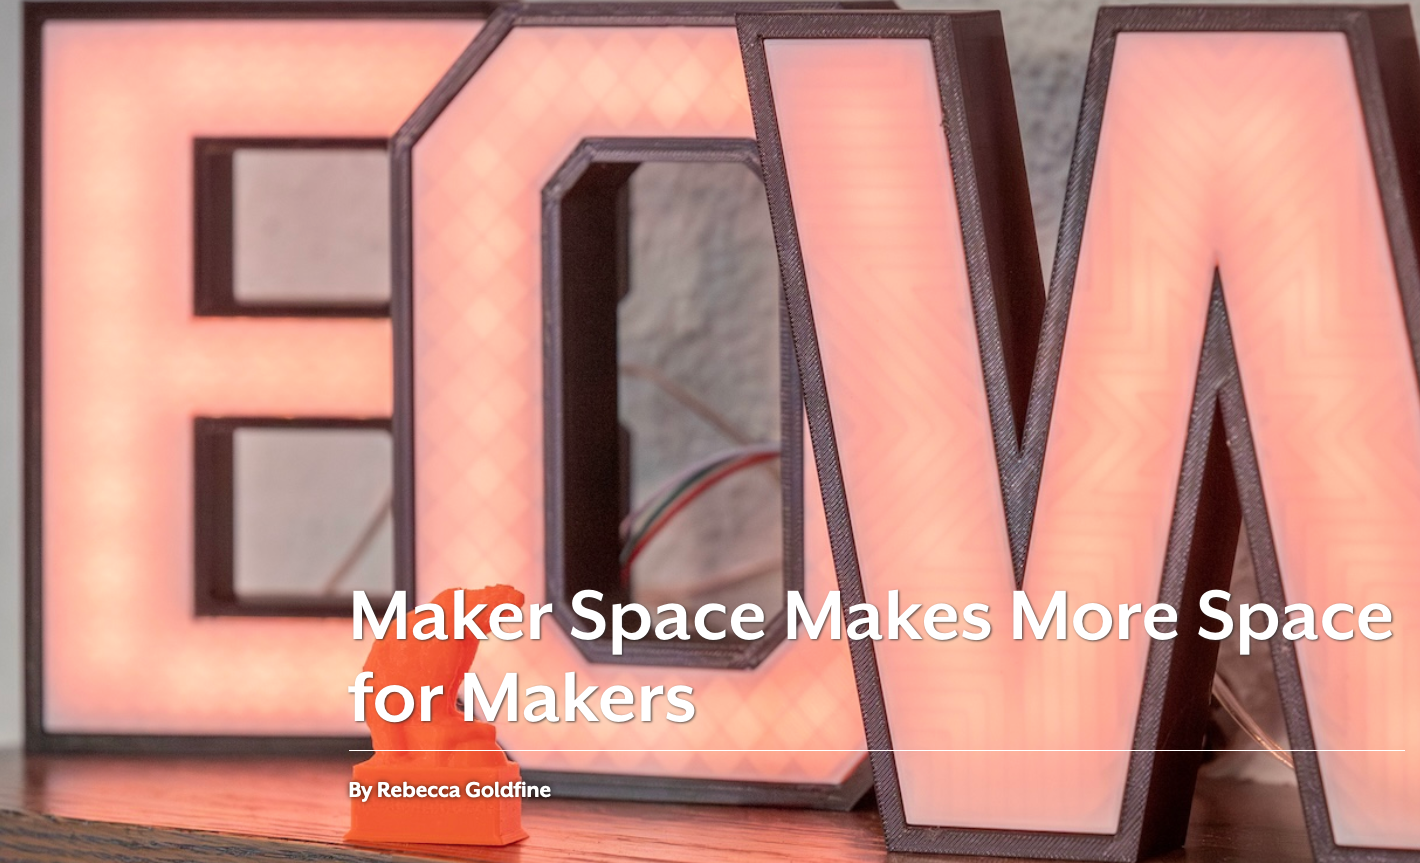 Maker Space Makes More Space for Makers